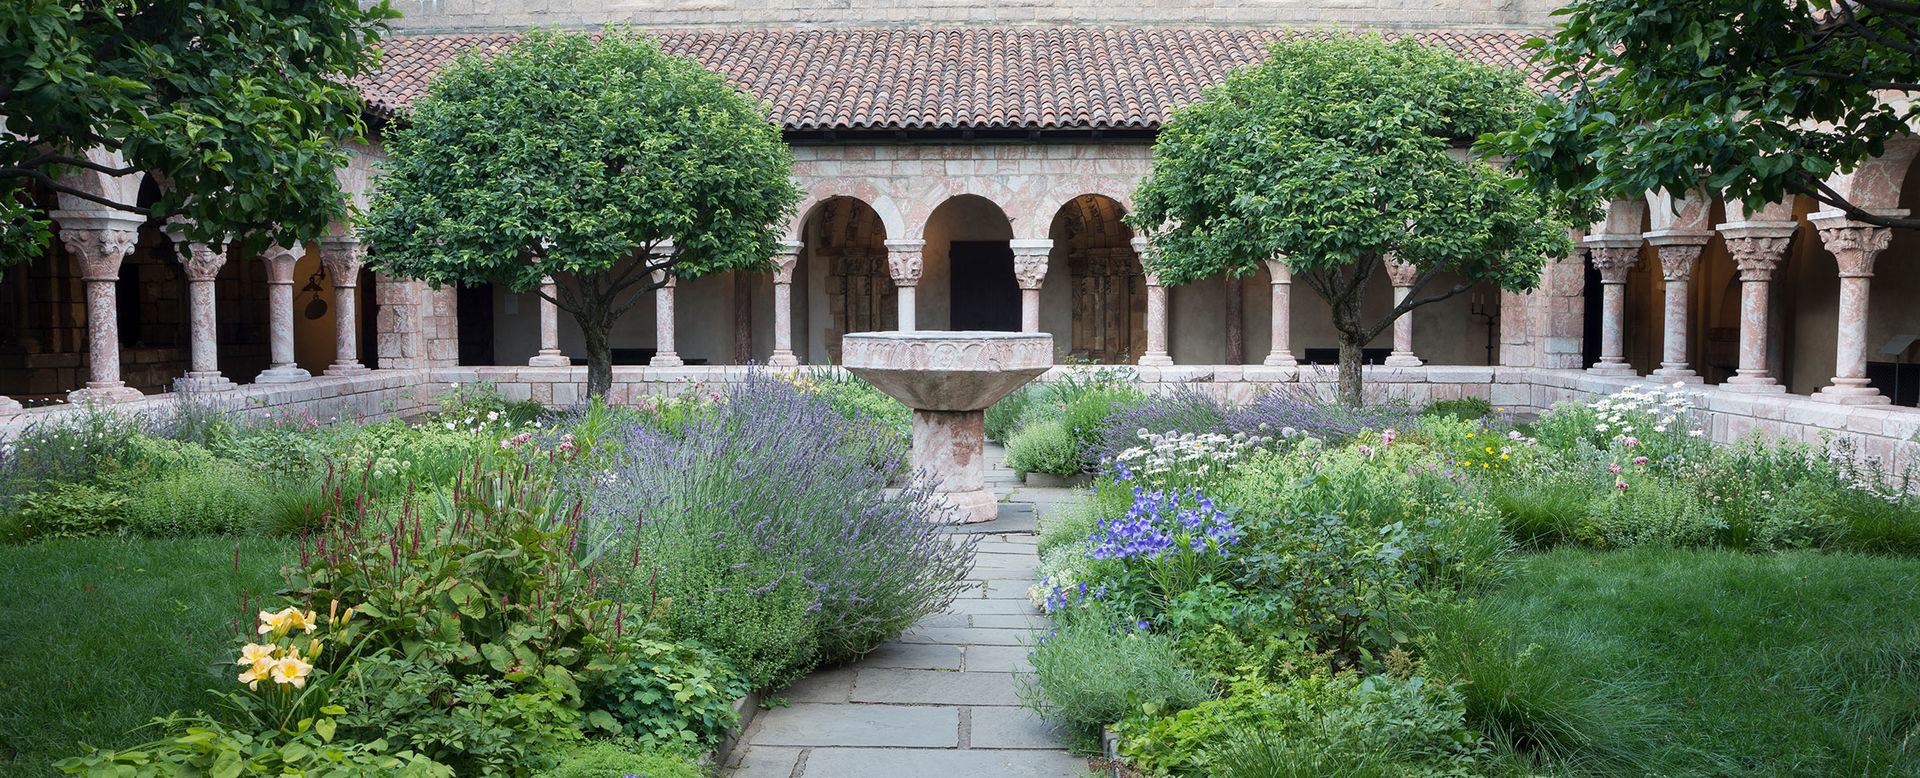 A garden courtyard surrounded by a arched colonnades; a central stone pathway with luscious plant beds encroaching on either side leads to a central stone fountain